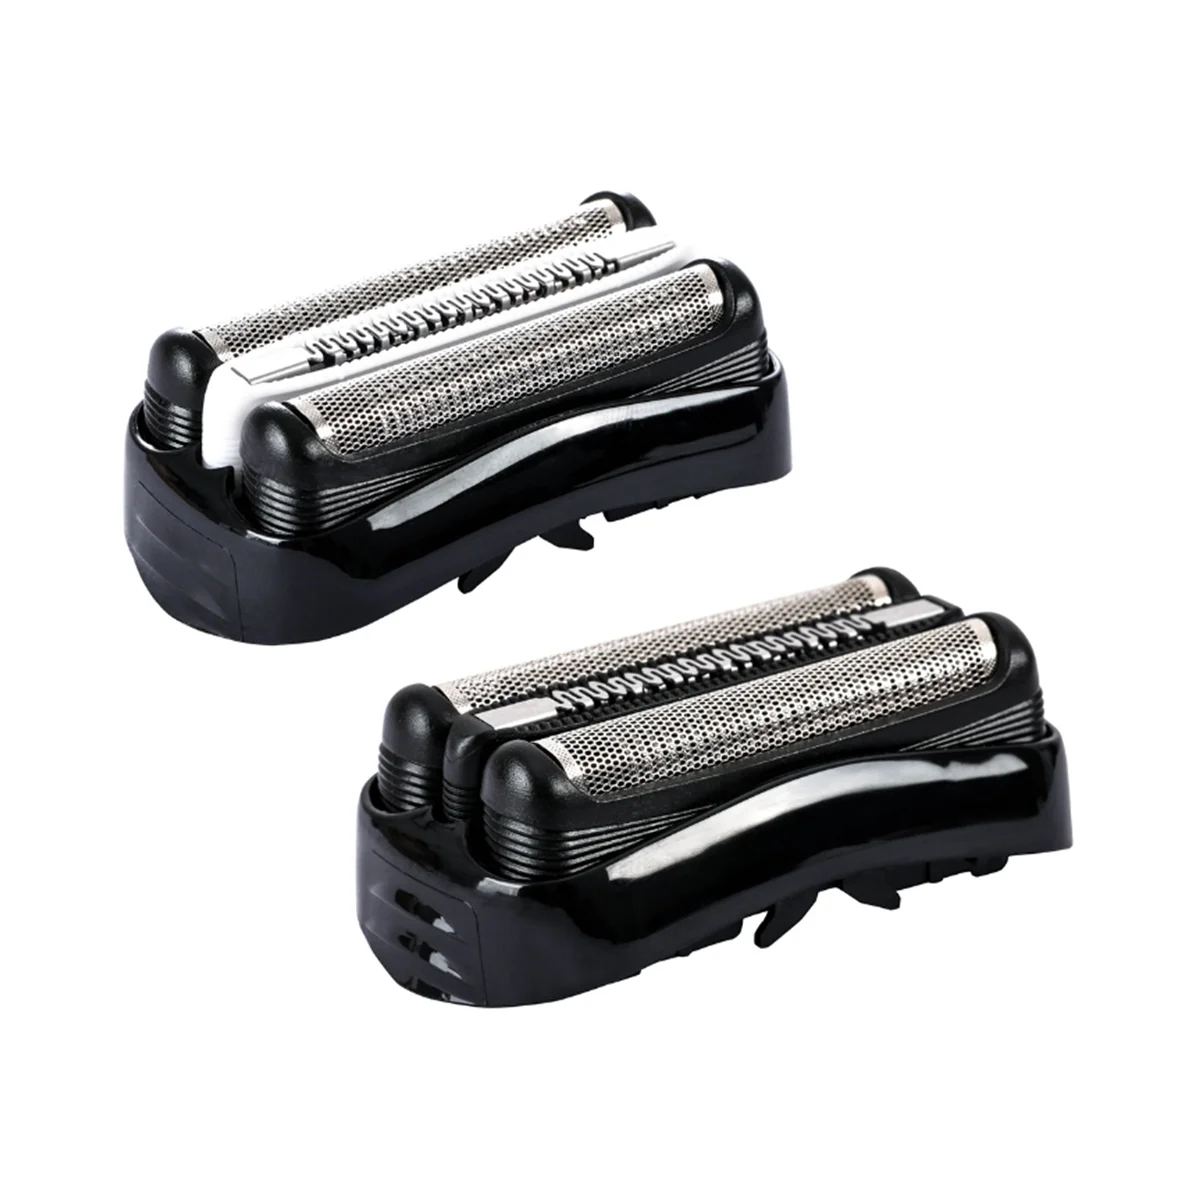 Replacement Shaver for Braun 3 Series Razor 32B 21B Men Electric Shaver Head 301S 310S 320S 330S 340S 360S 3020S 3030S